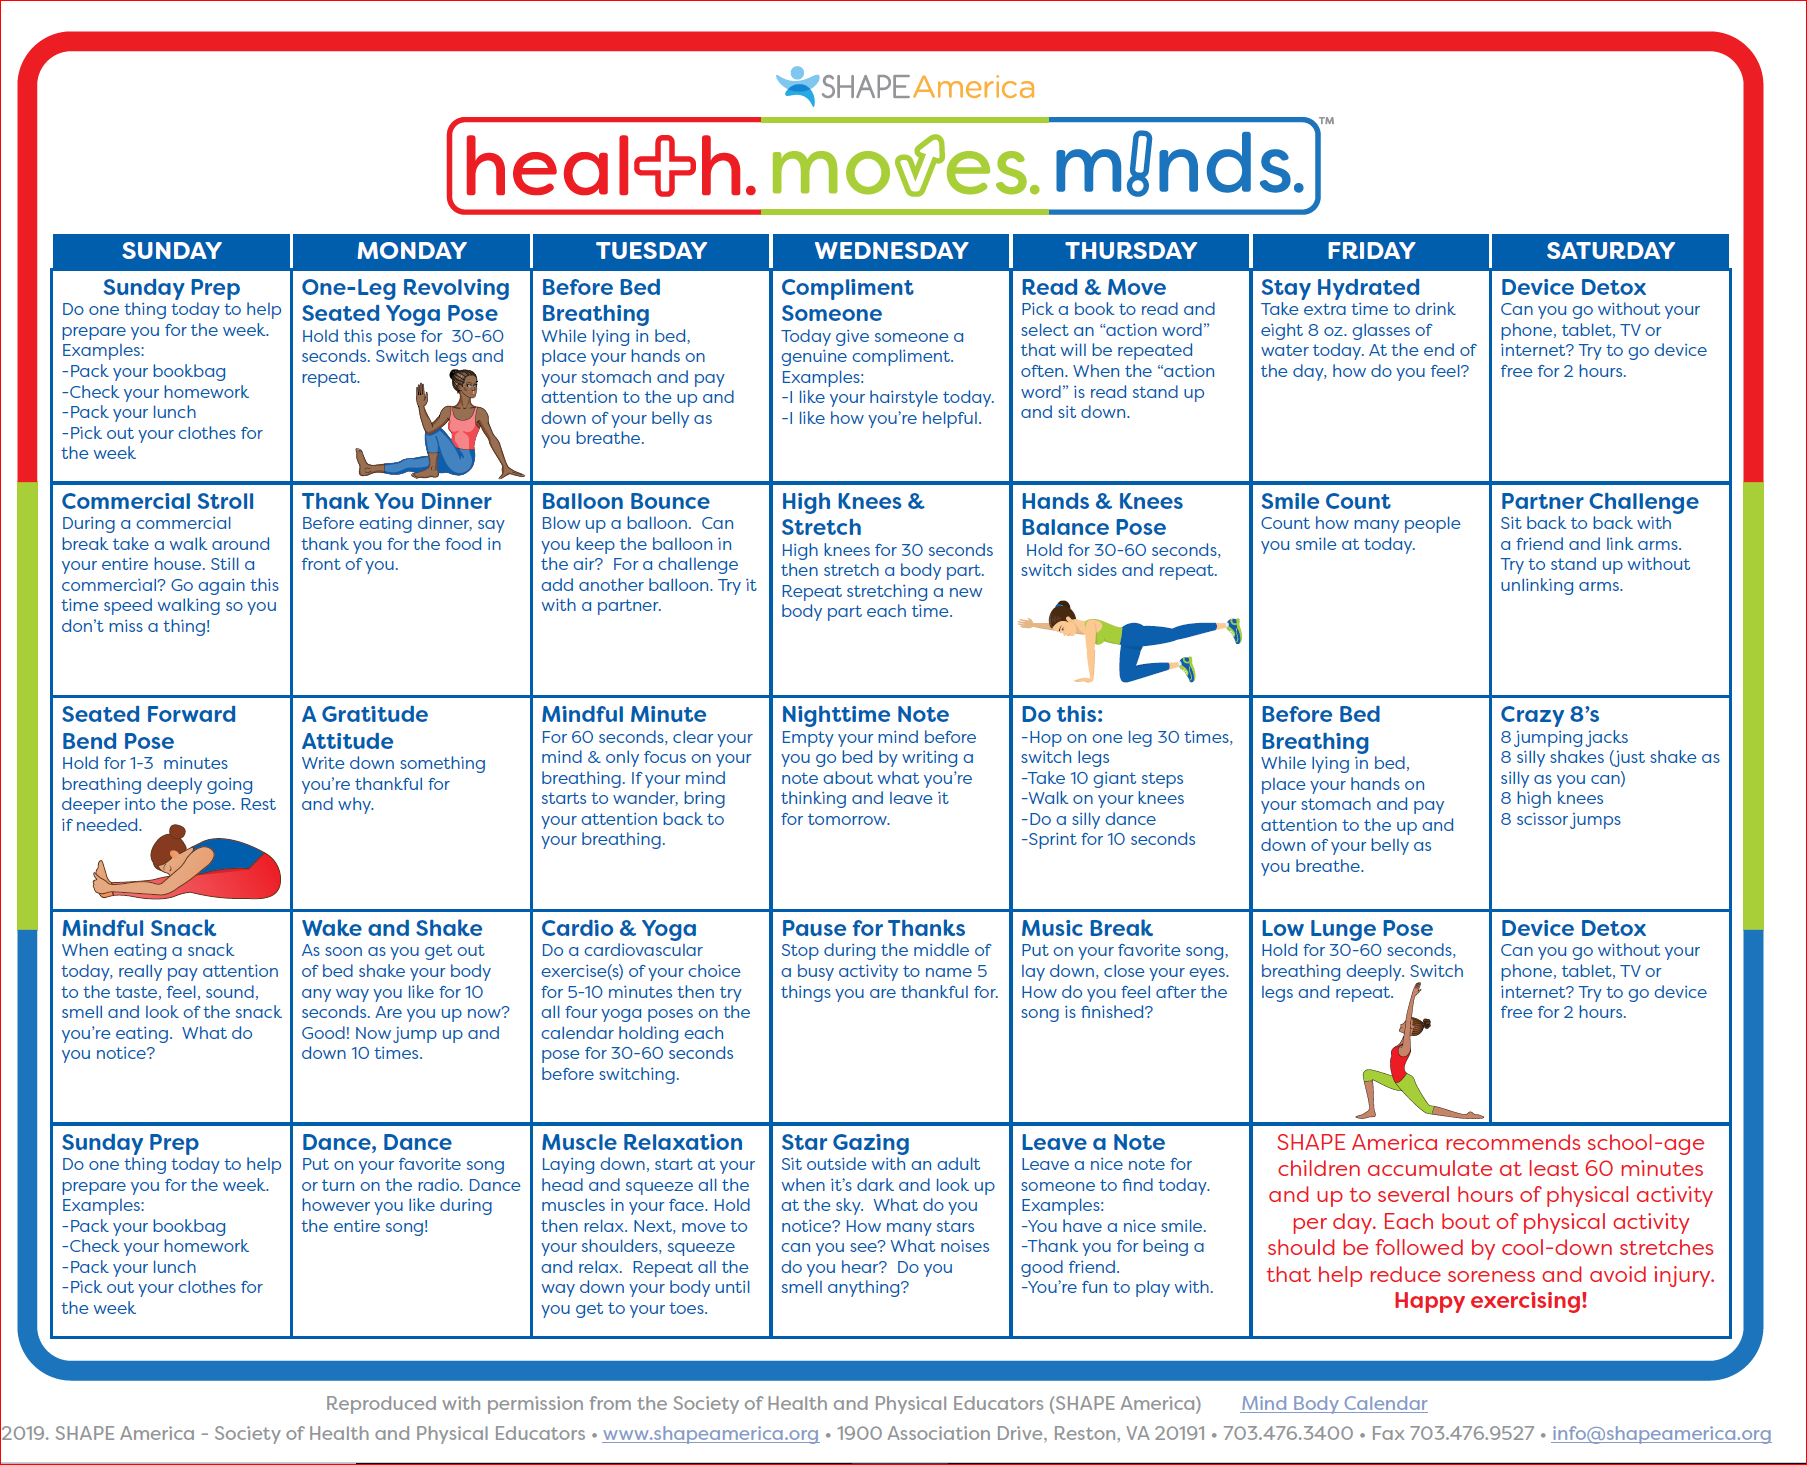 Mindfulness Calendar from health. moves. minds.